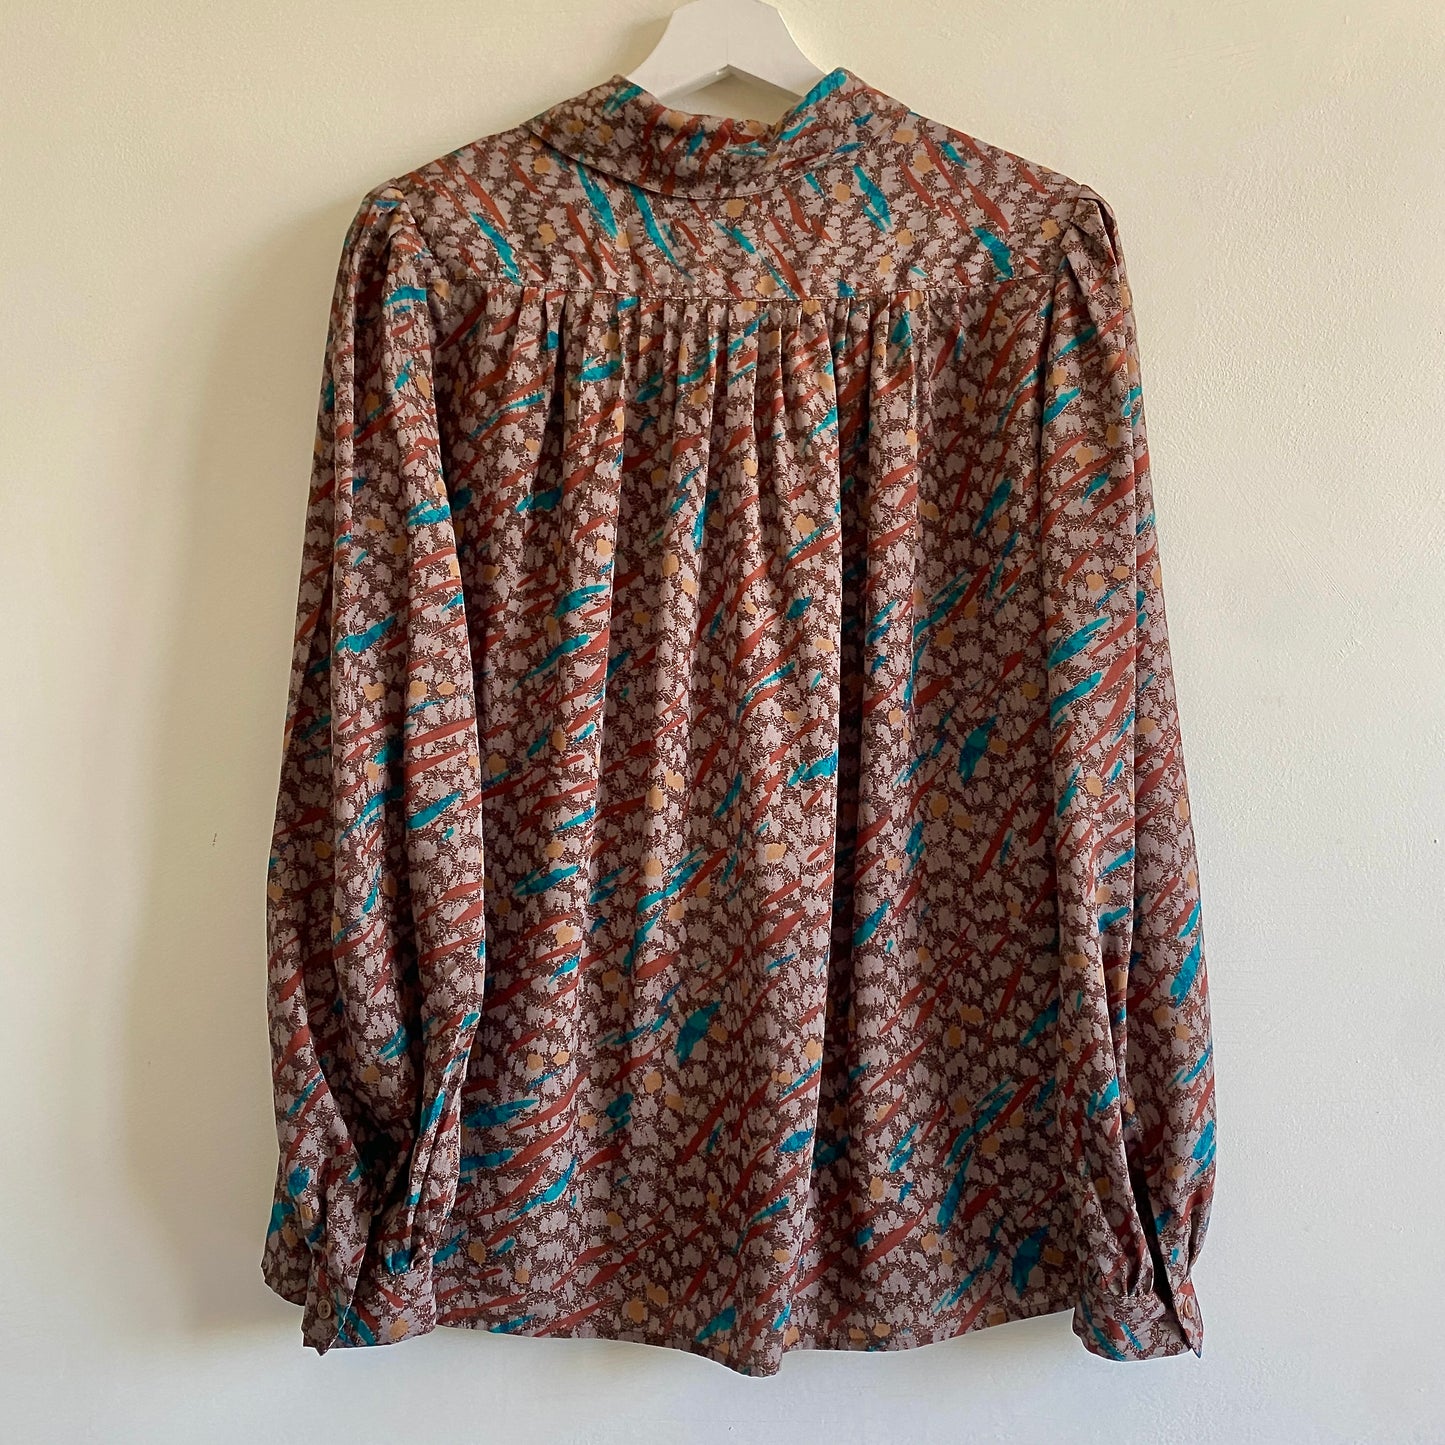 Patterned Blouse was £26